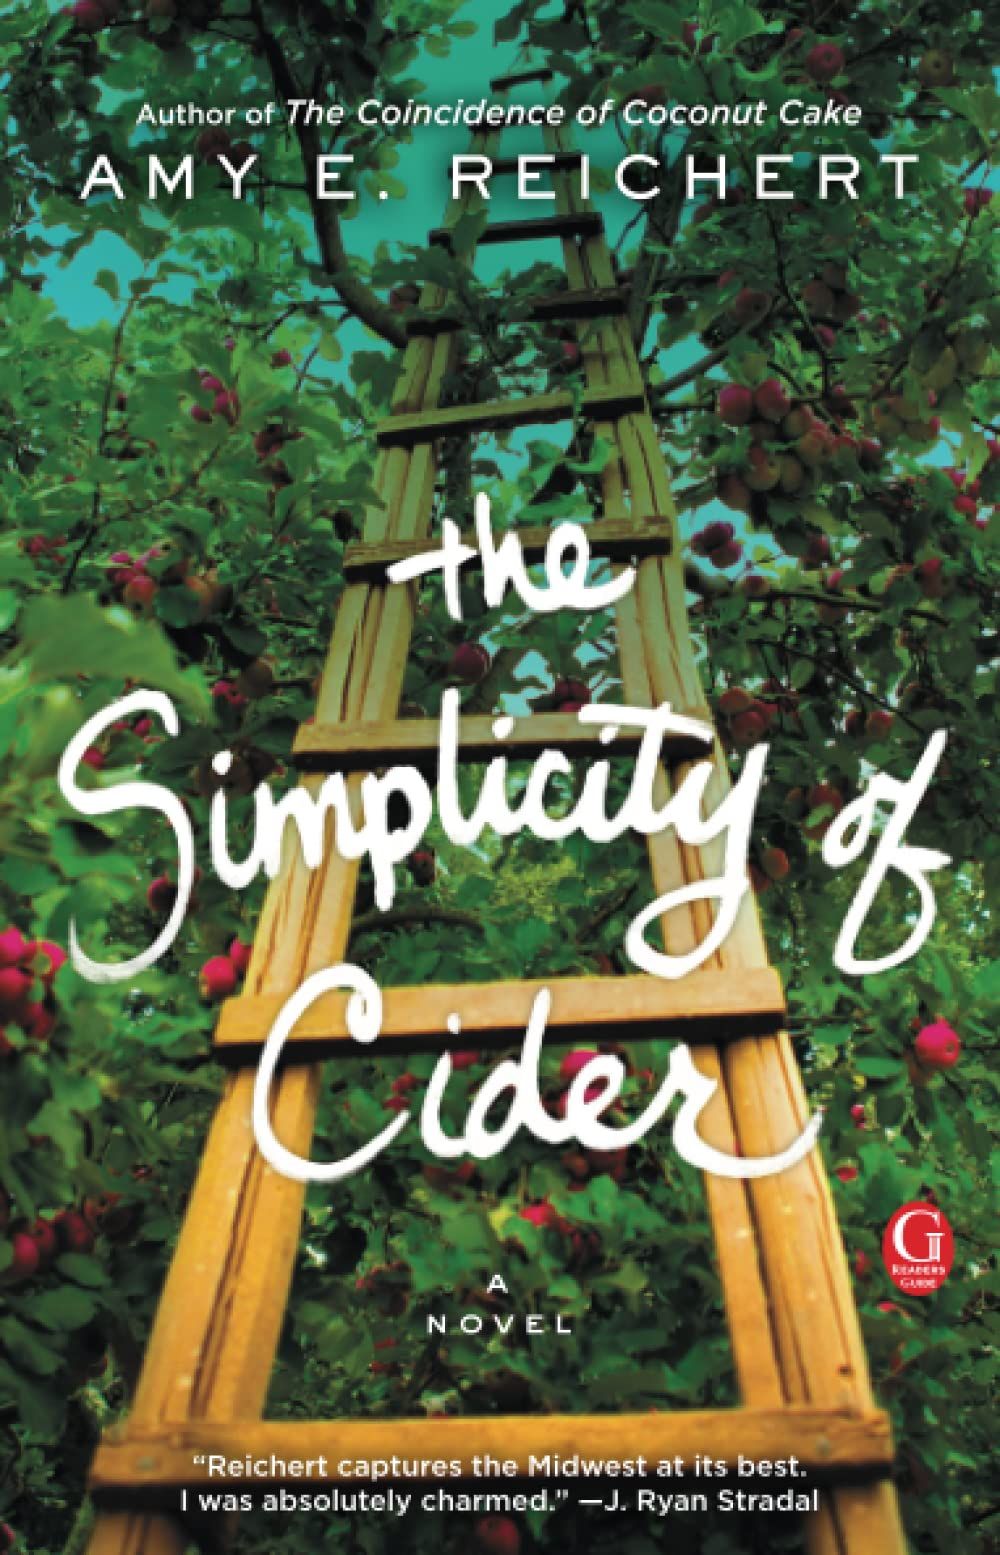 Front cover of the Simplicity of Cider book